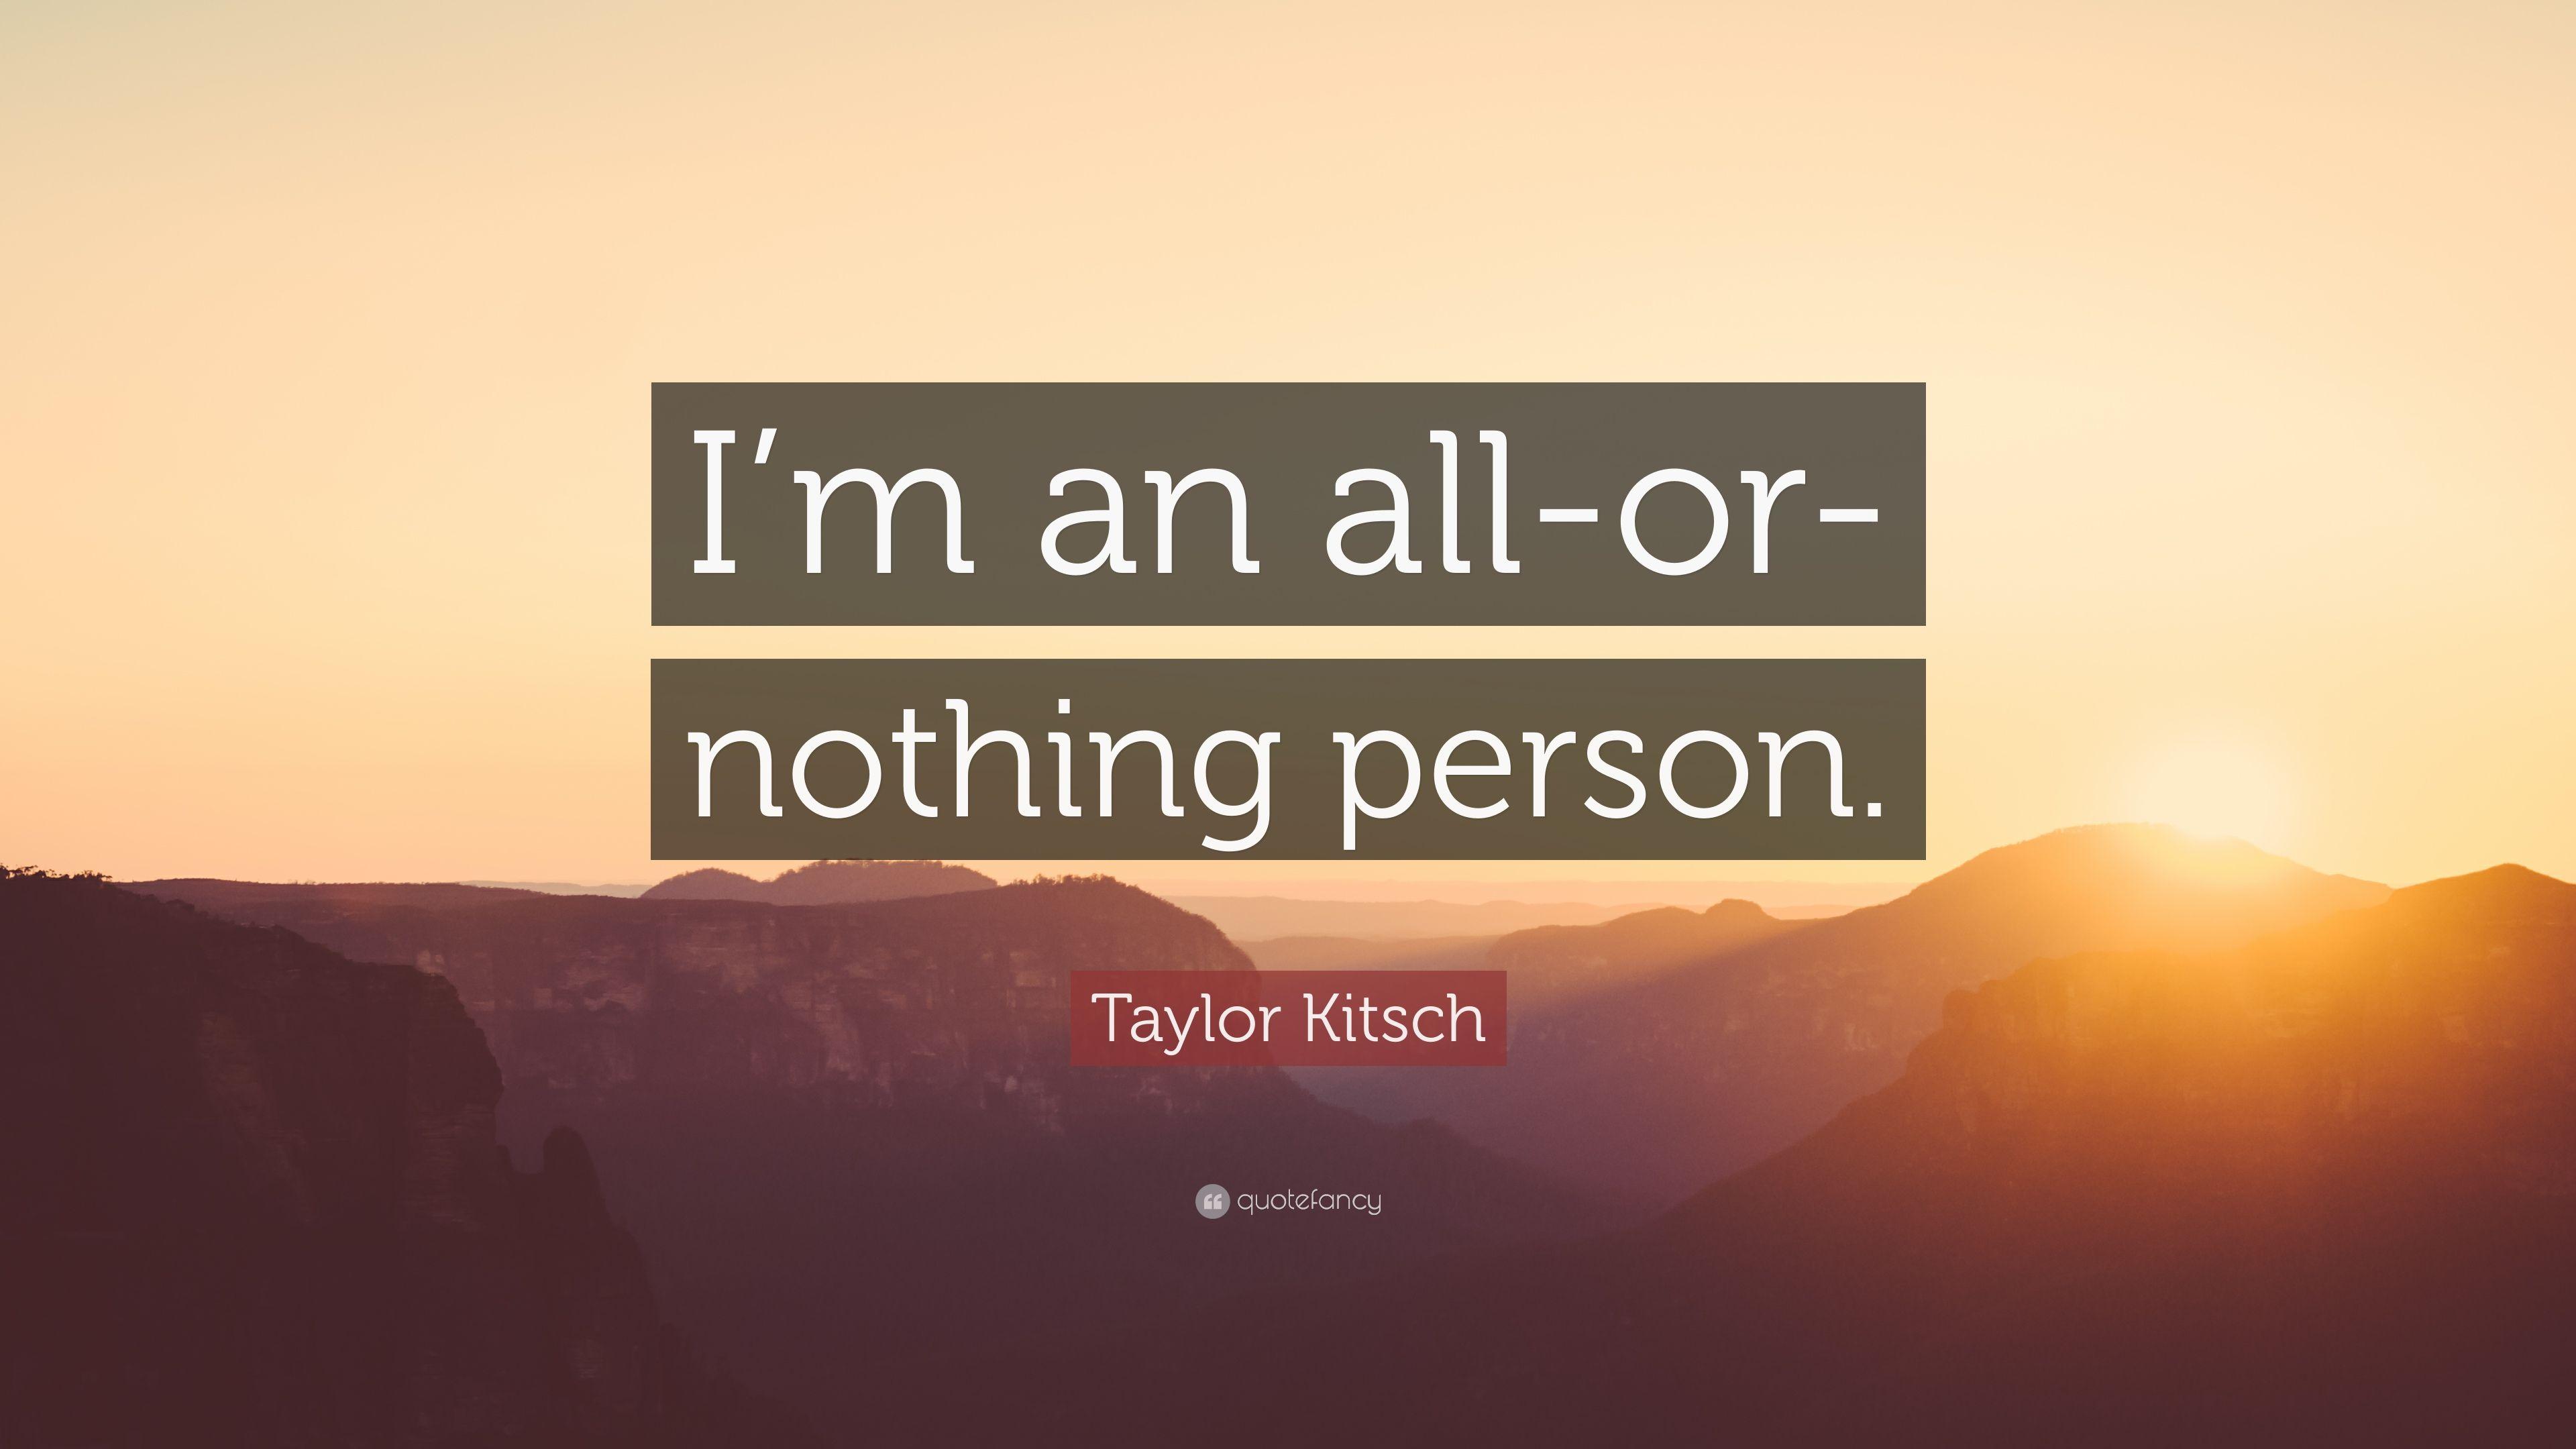 Taylor Kitsch Quote: “I'm An All Or Nothing Person.” 9 Wallpaper